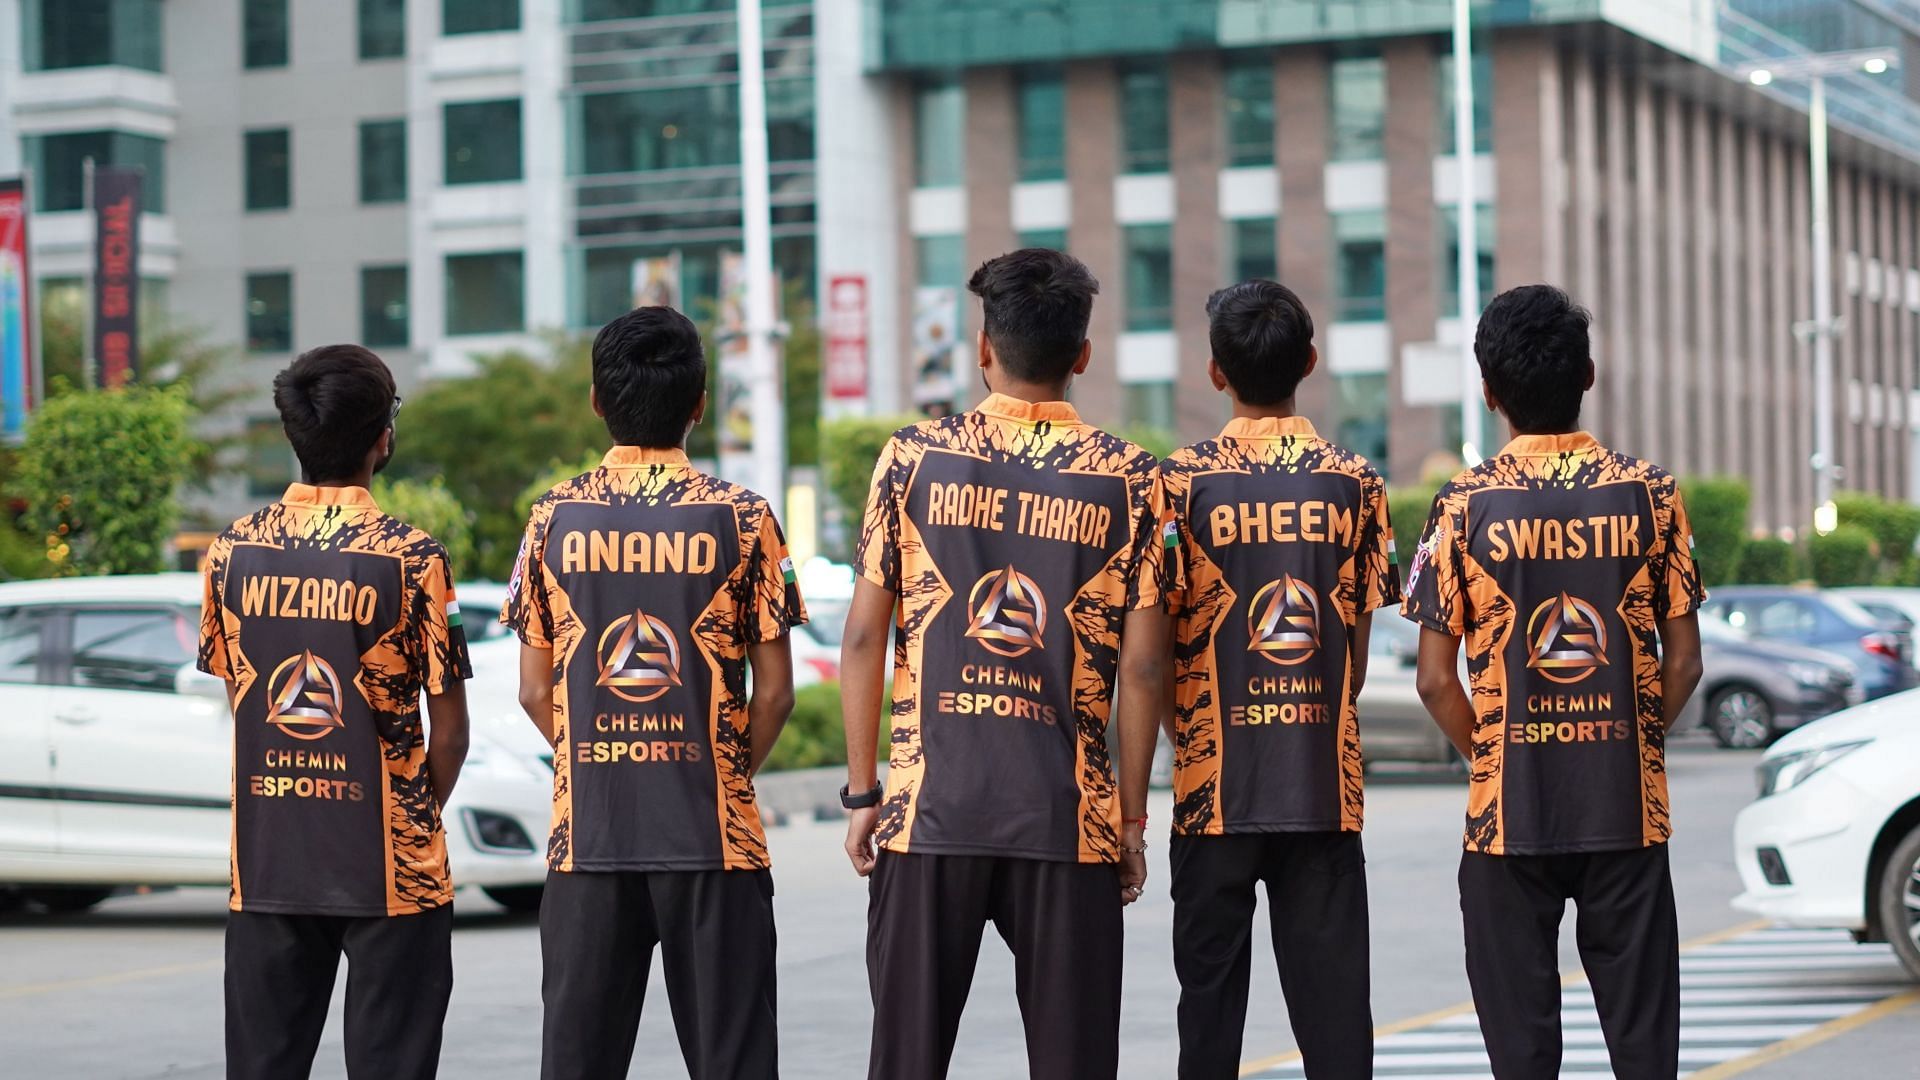 The former 4 Unknown has been one of the top sides in the Free Fire Indian esports scene